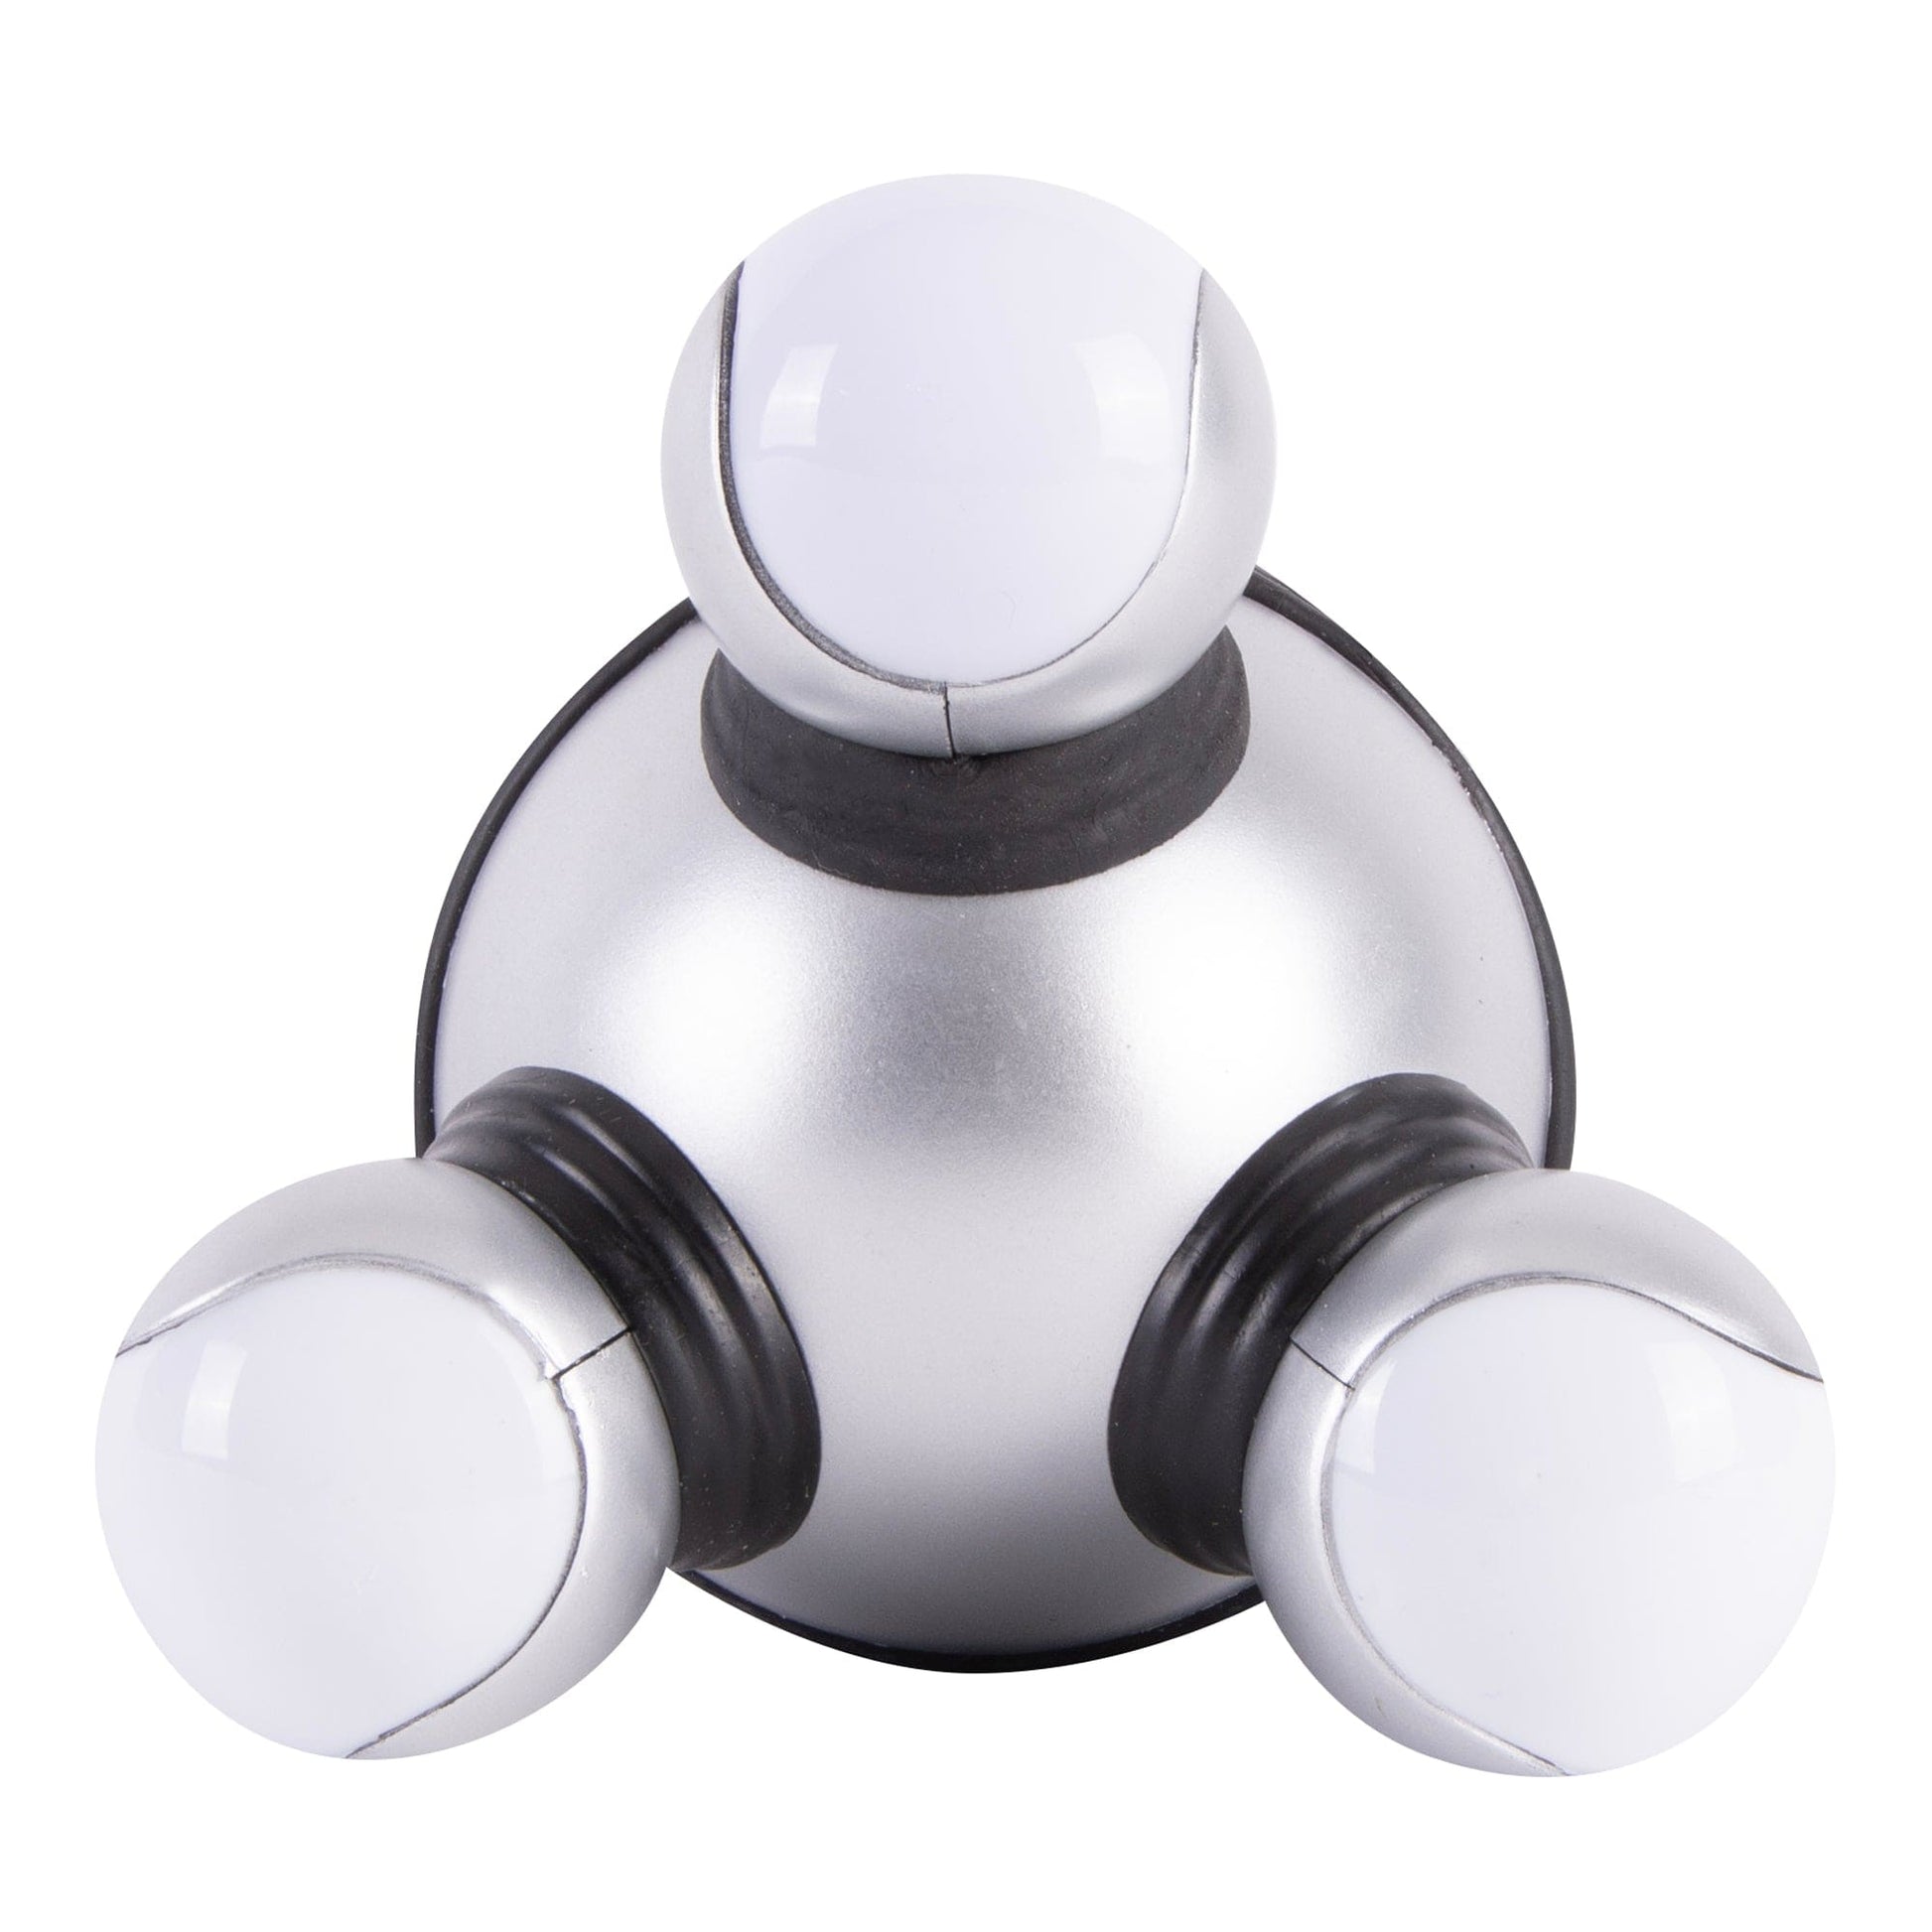 Remology personal care Mini Therapy Handheld Massager